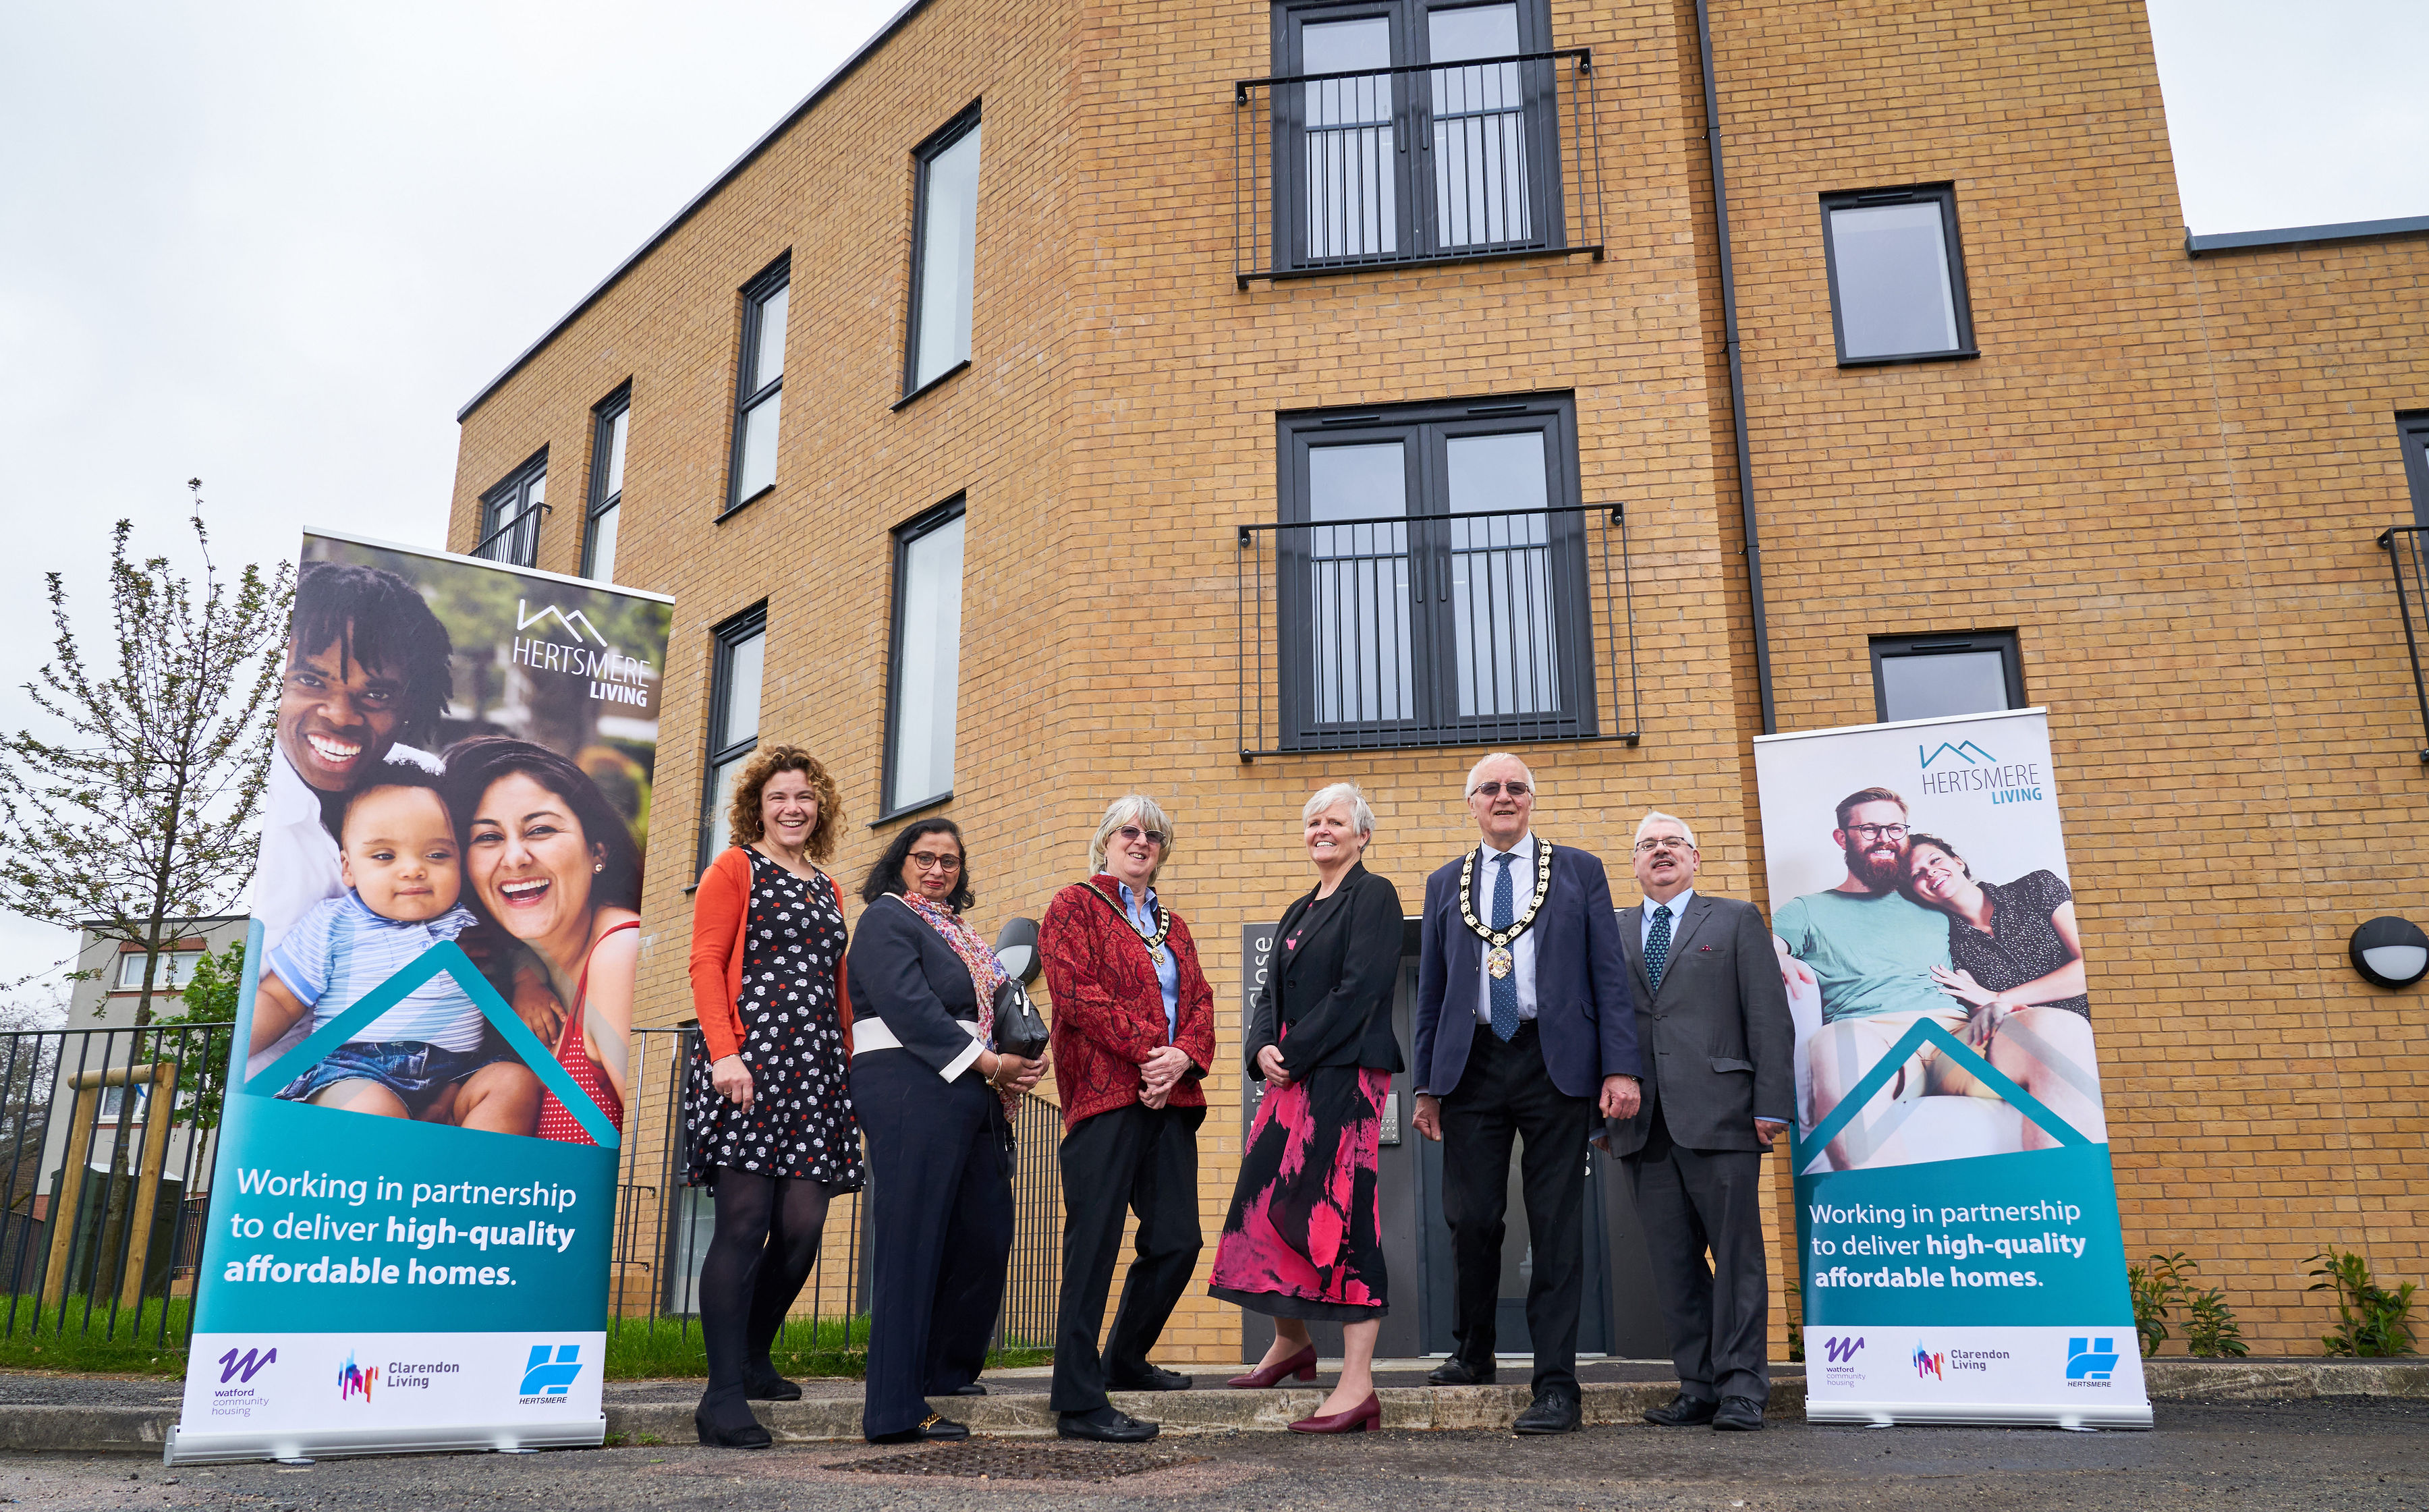 Our new joint venture brings much-needed homes to Hertsmere